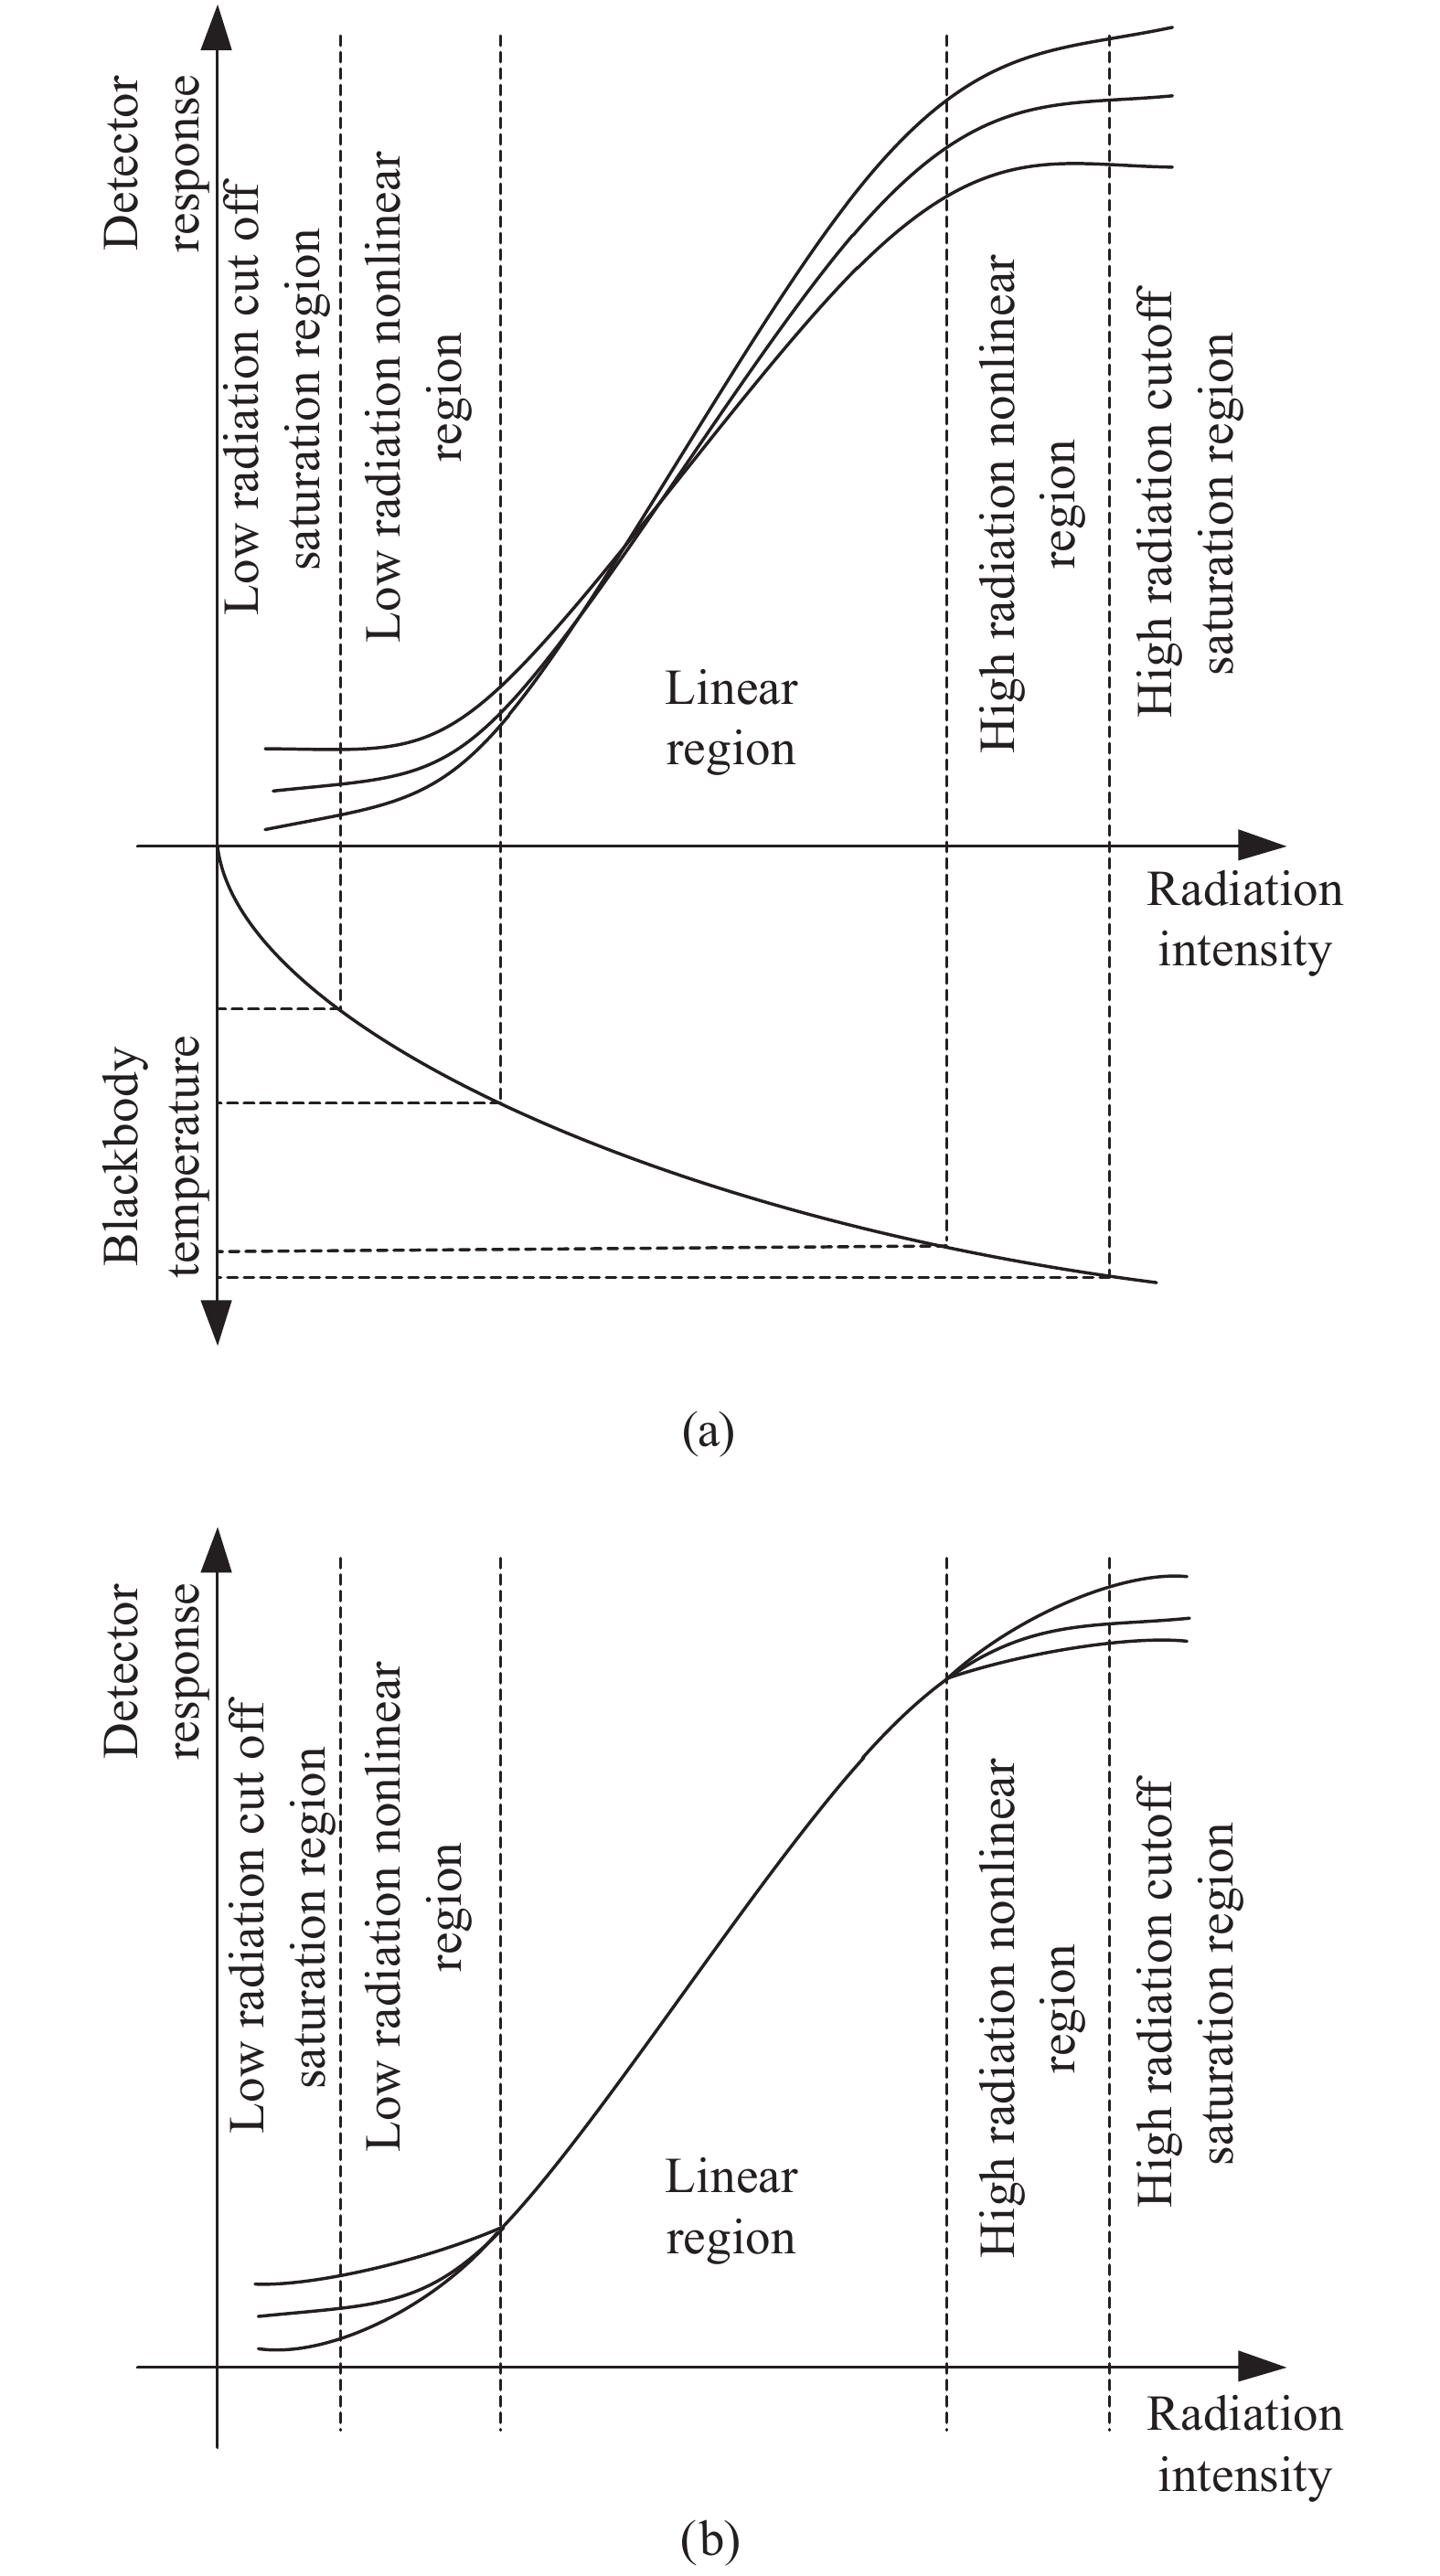 (a) Schematic diagram of the original response characteristic curves of the IRFPA detector; (b) Schematic diagram of response characteristic curves after correcting by traditional linear correction algorithm